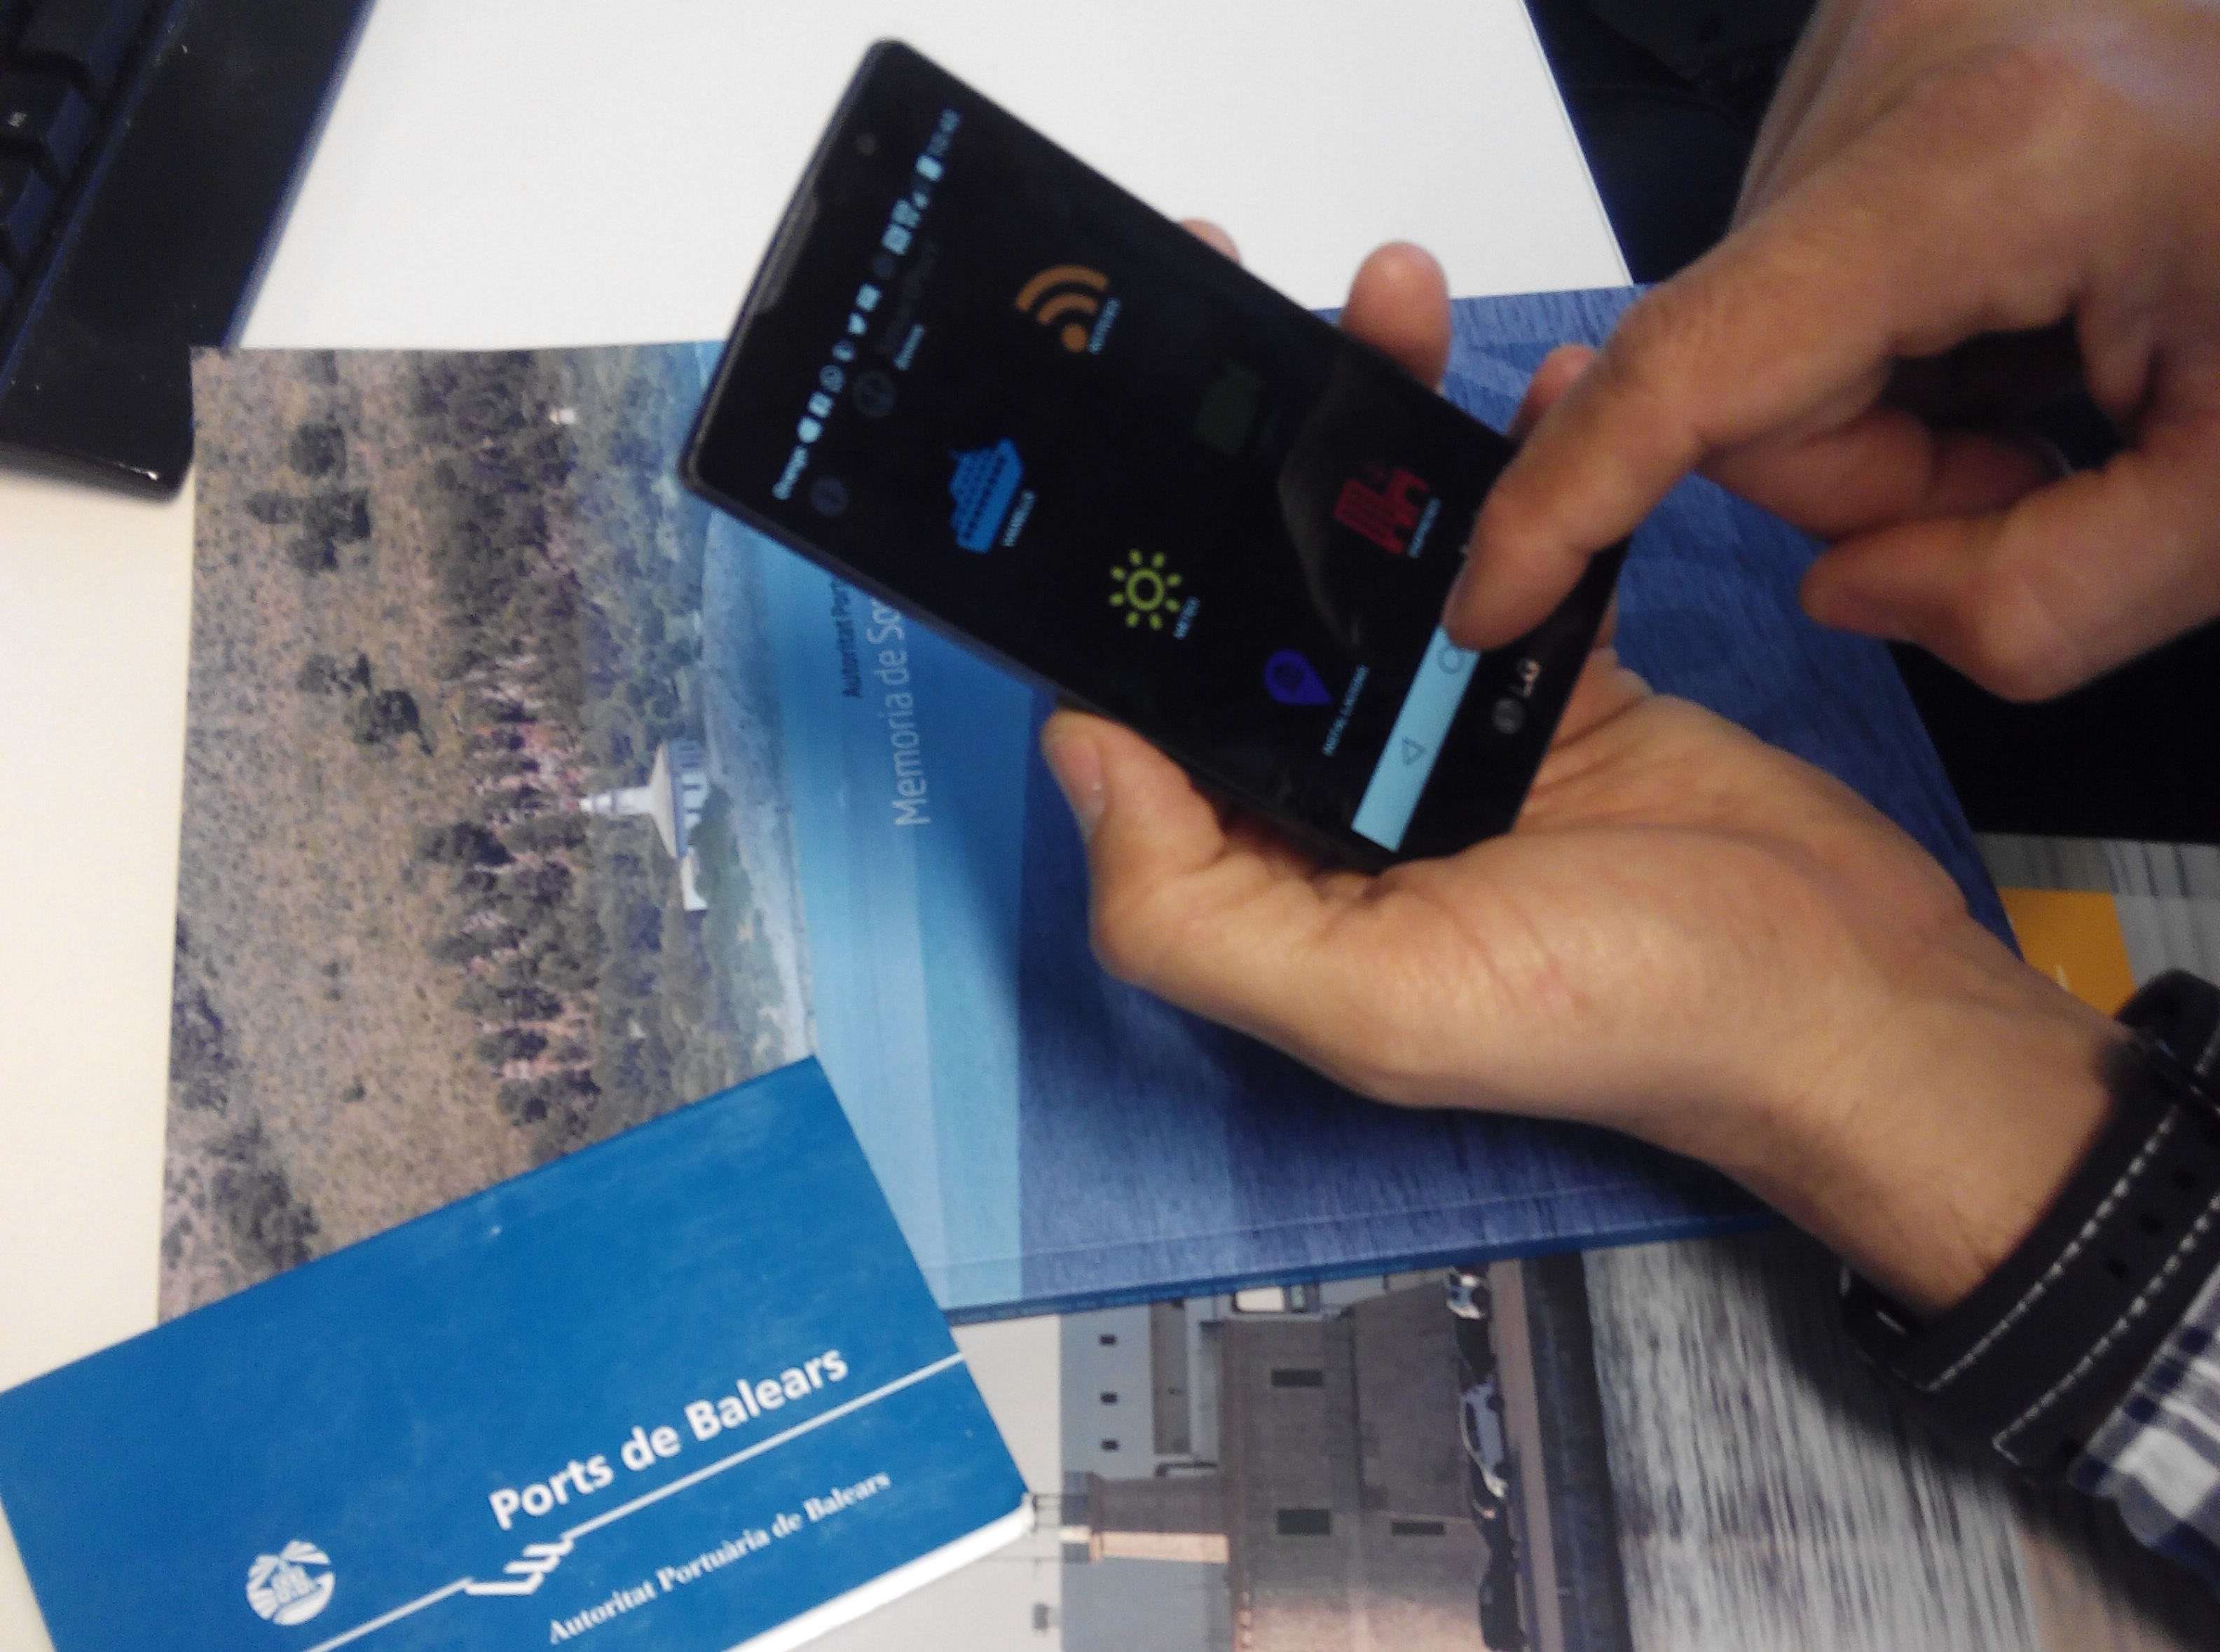 Balearic Islands’ general interest ports, accessible from a new App for smartphones